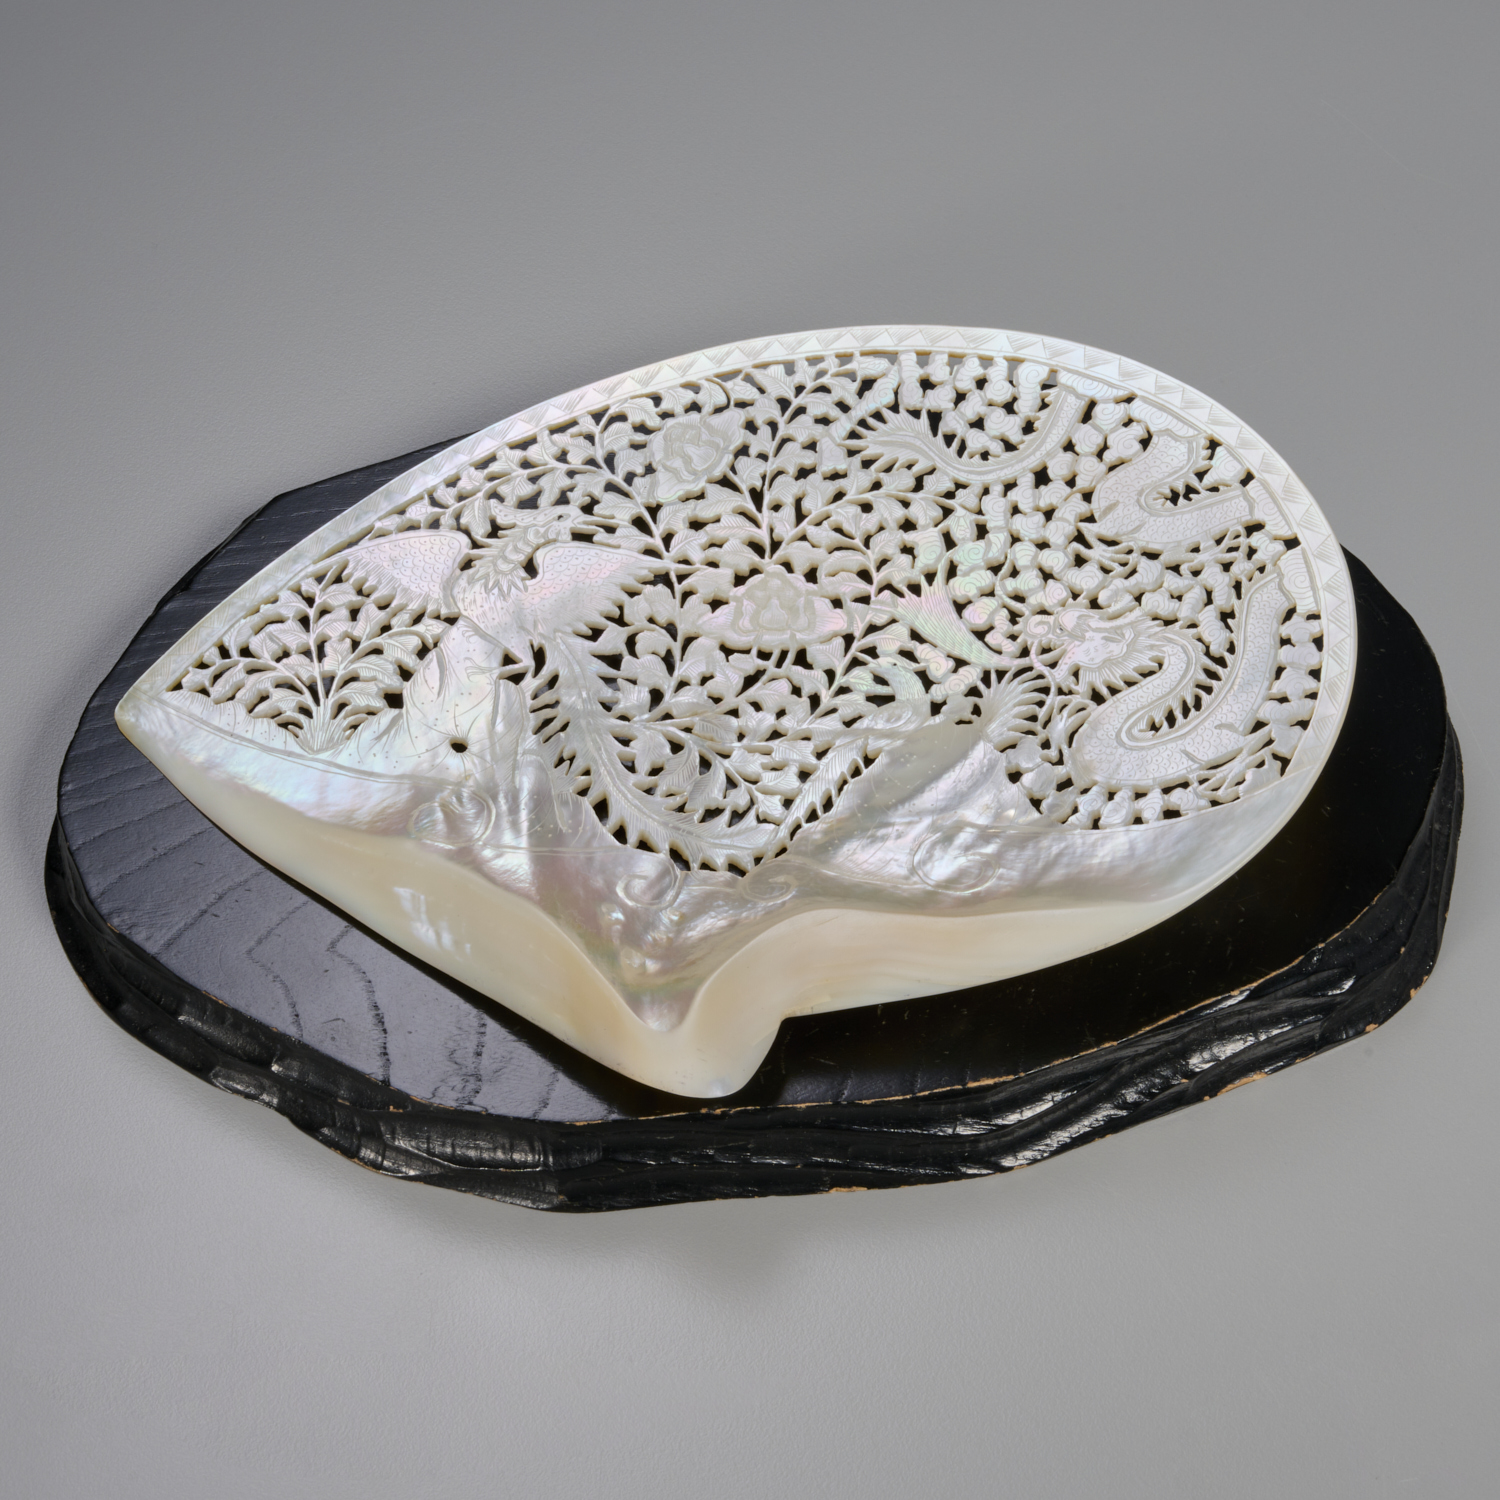 CHINESE MOTHER OF PEARL SHELL CARVING 2fc317